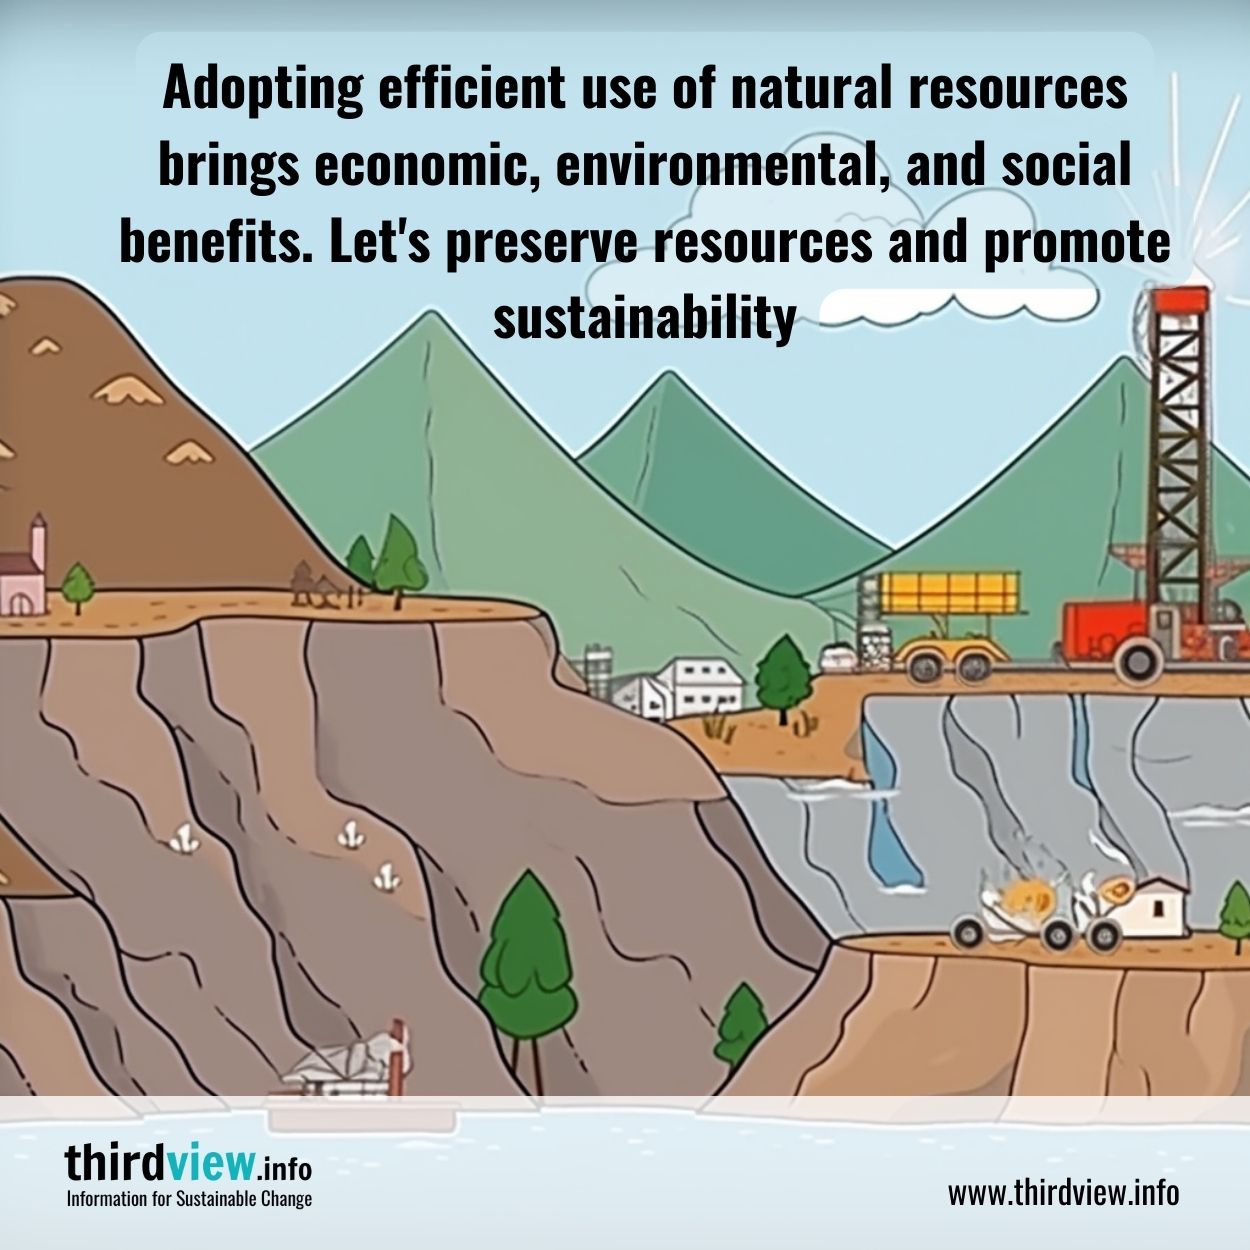 https://thirdview.info/wp-content/uploads/2023/05/Adopting-efficient-use-of-natural-resources-brings-economic-environmental-and-social-benefits.-Lets-preserve-resources-and-promote-sustainability.jpg